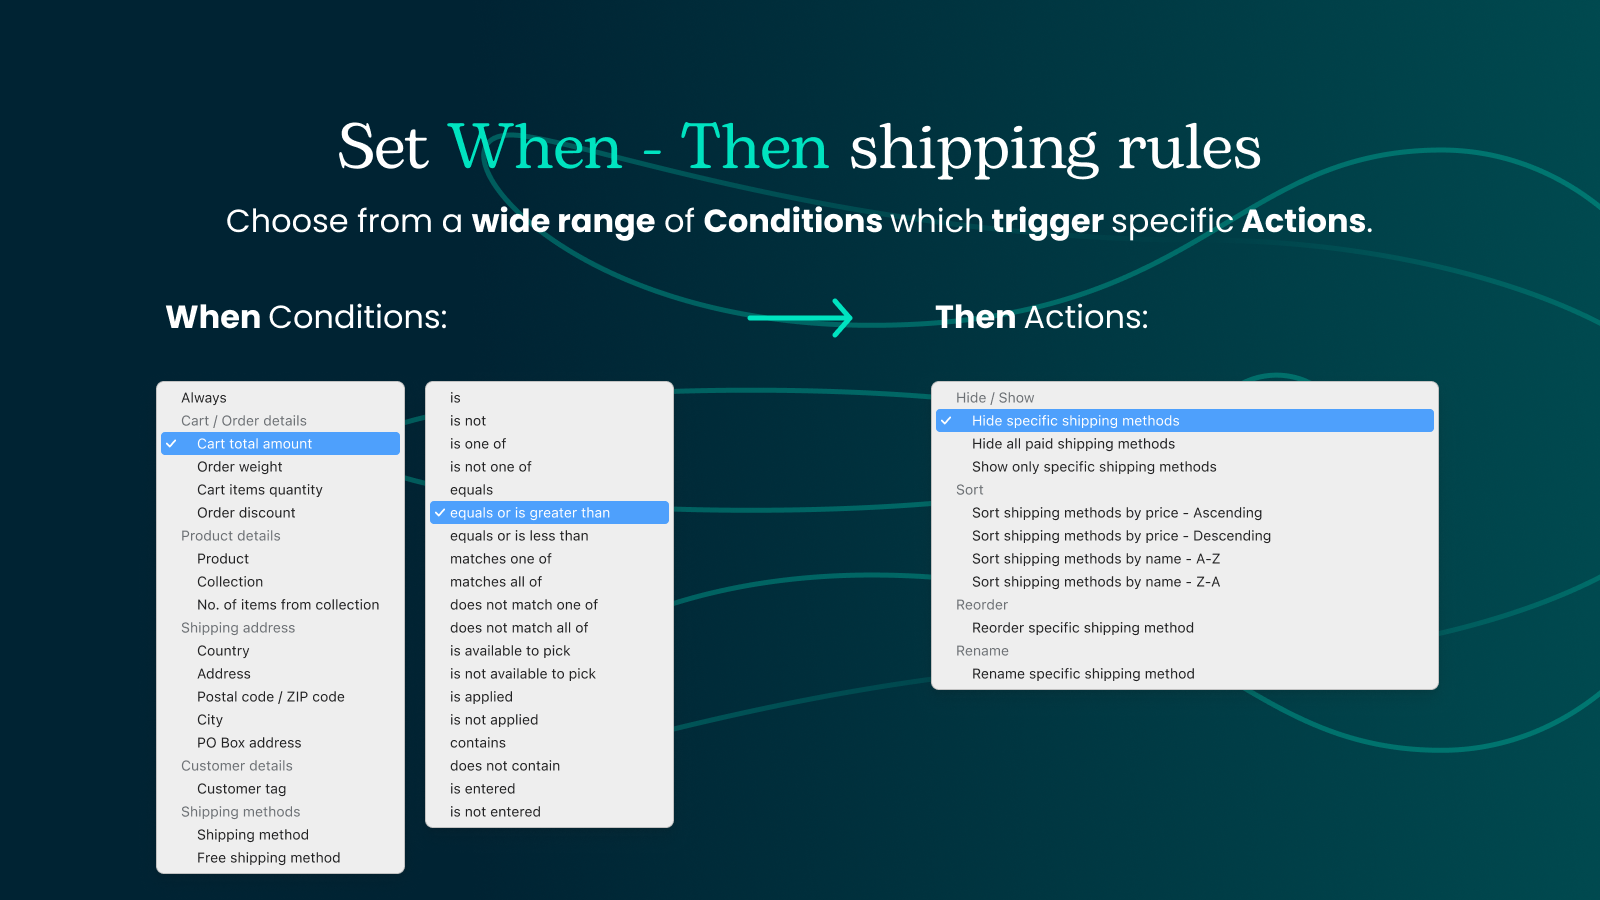 When-Then shipping rules with various Conditions and Actions